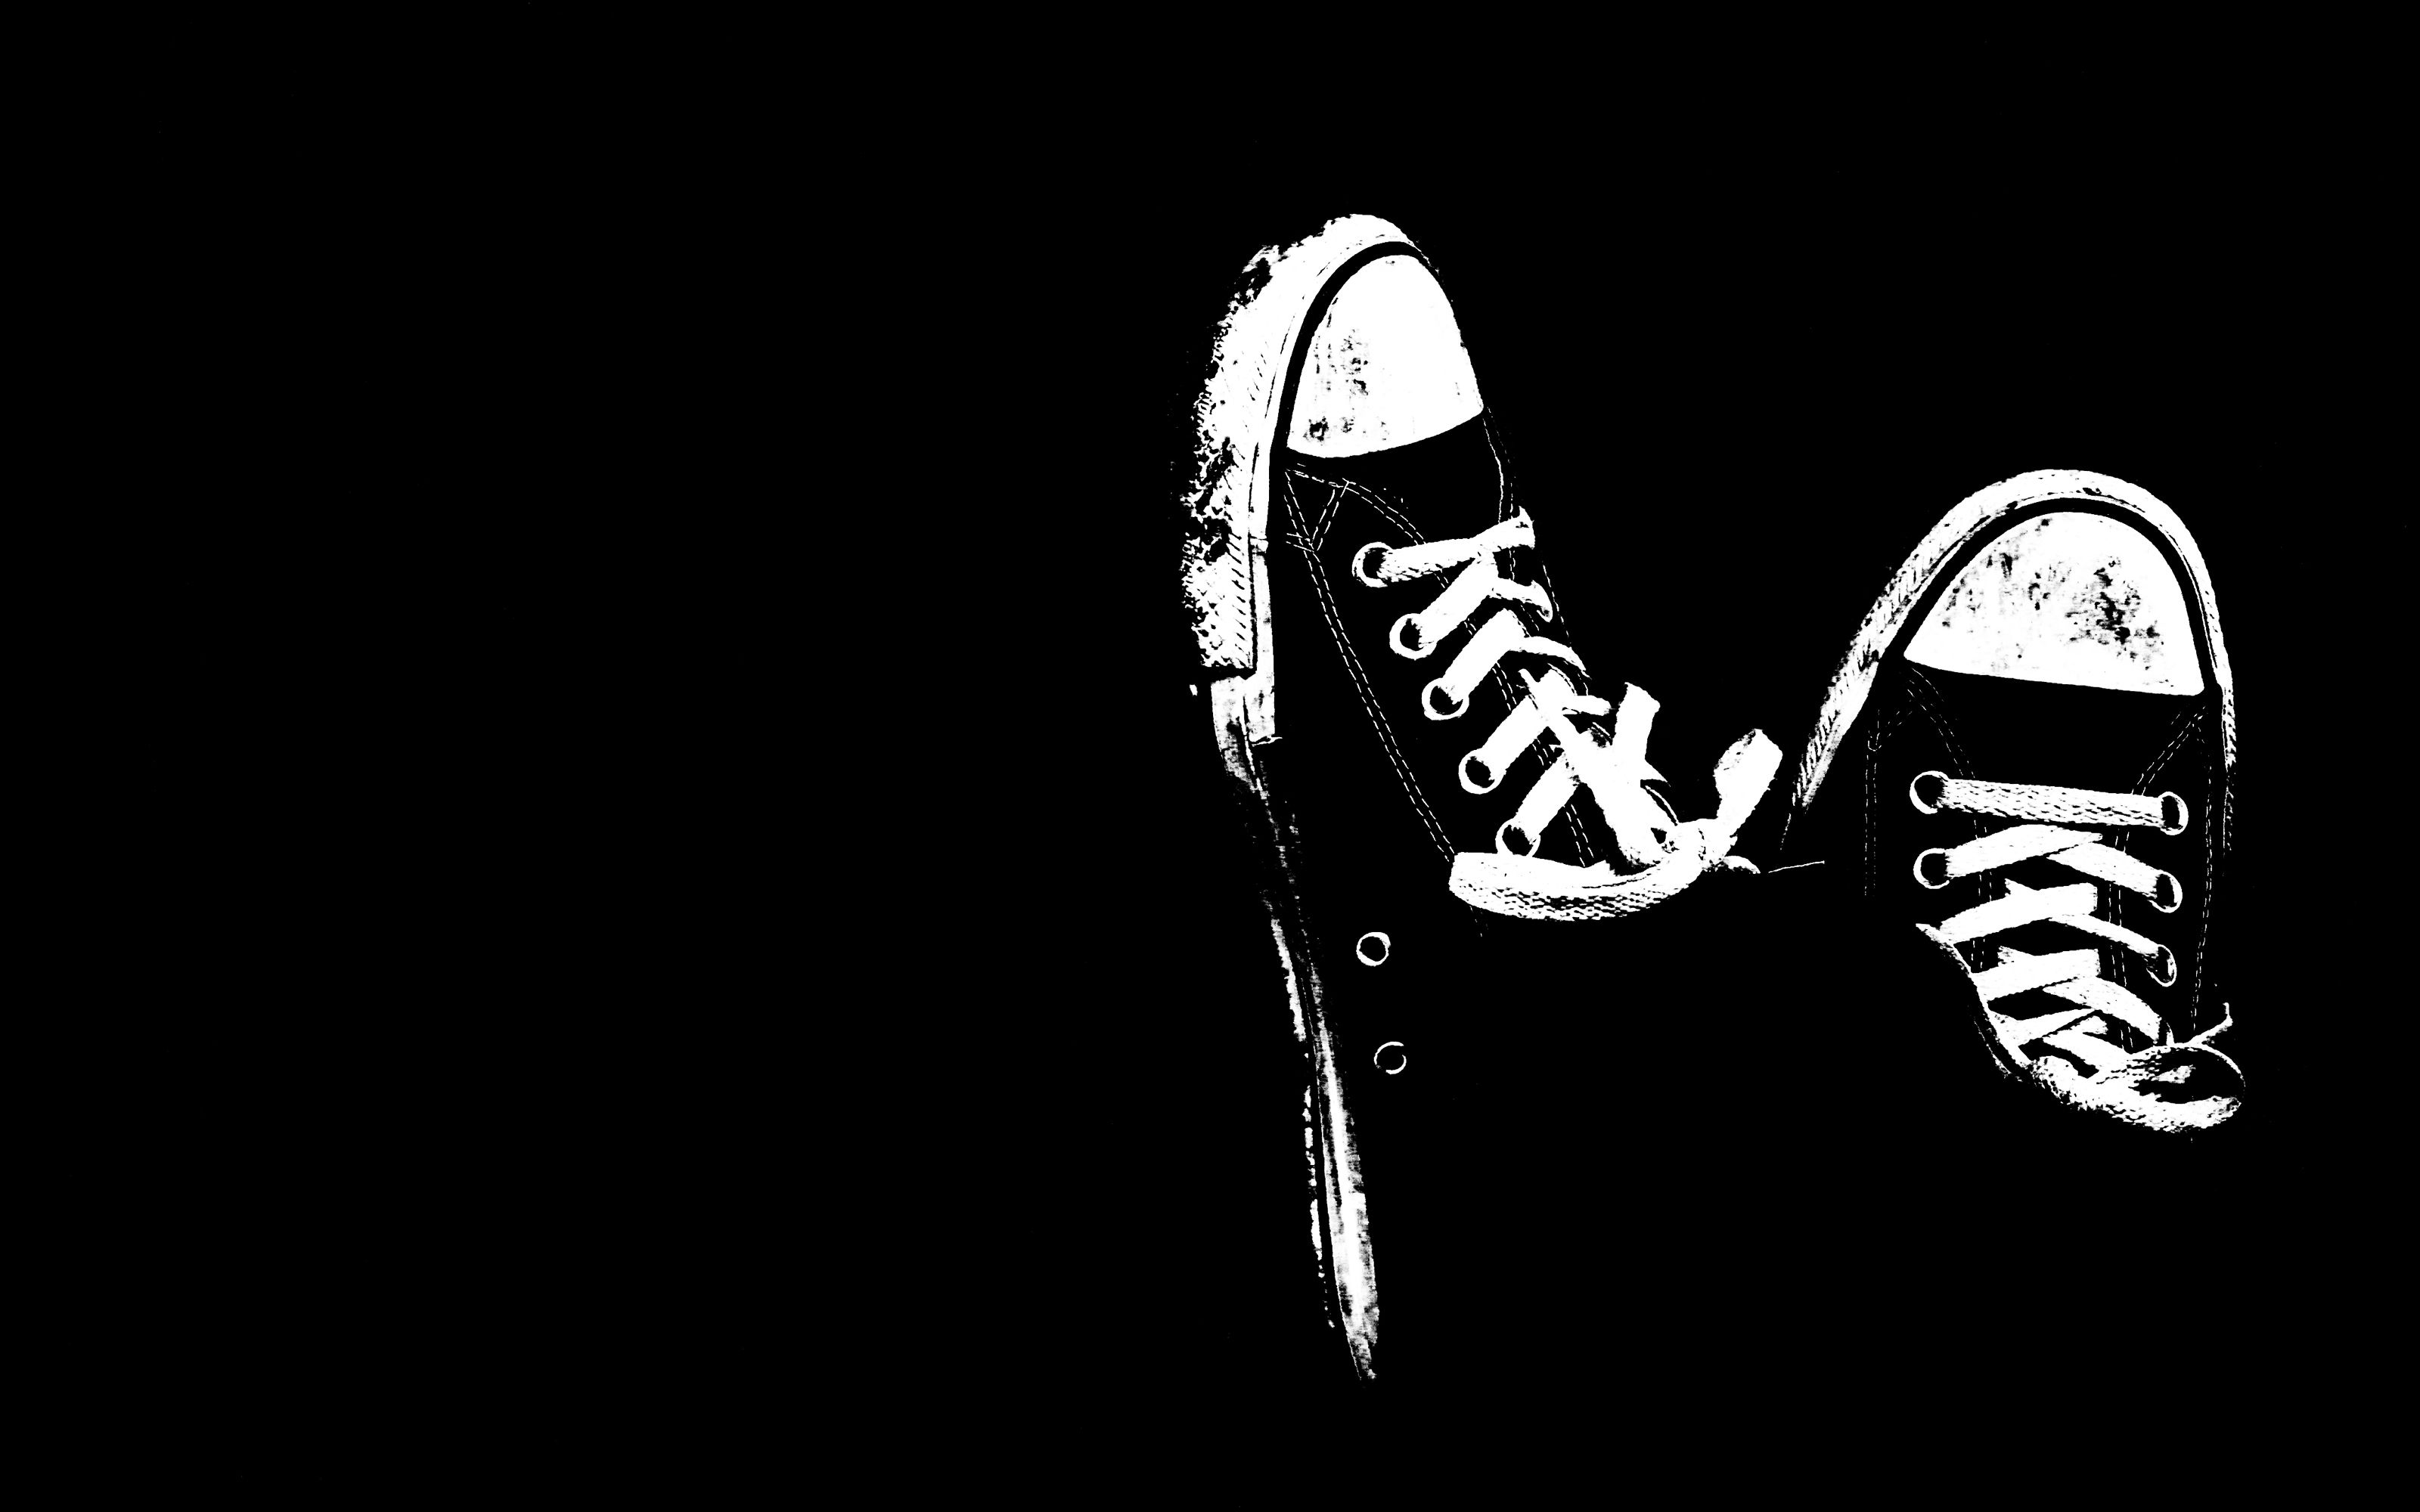 Cool Abstract Shoes Black Background HD Wallpaper Image